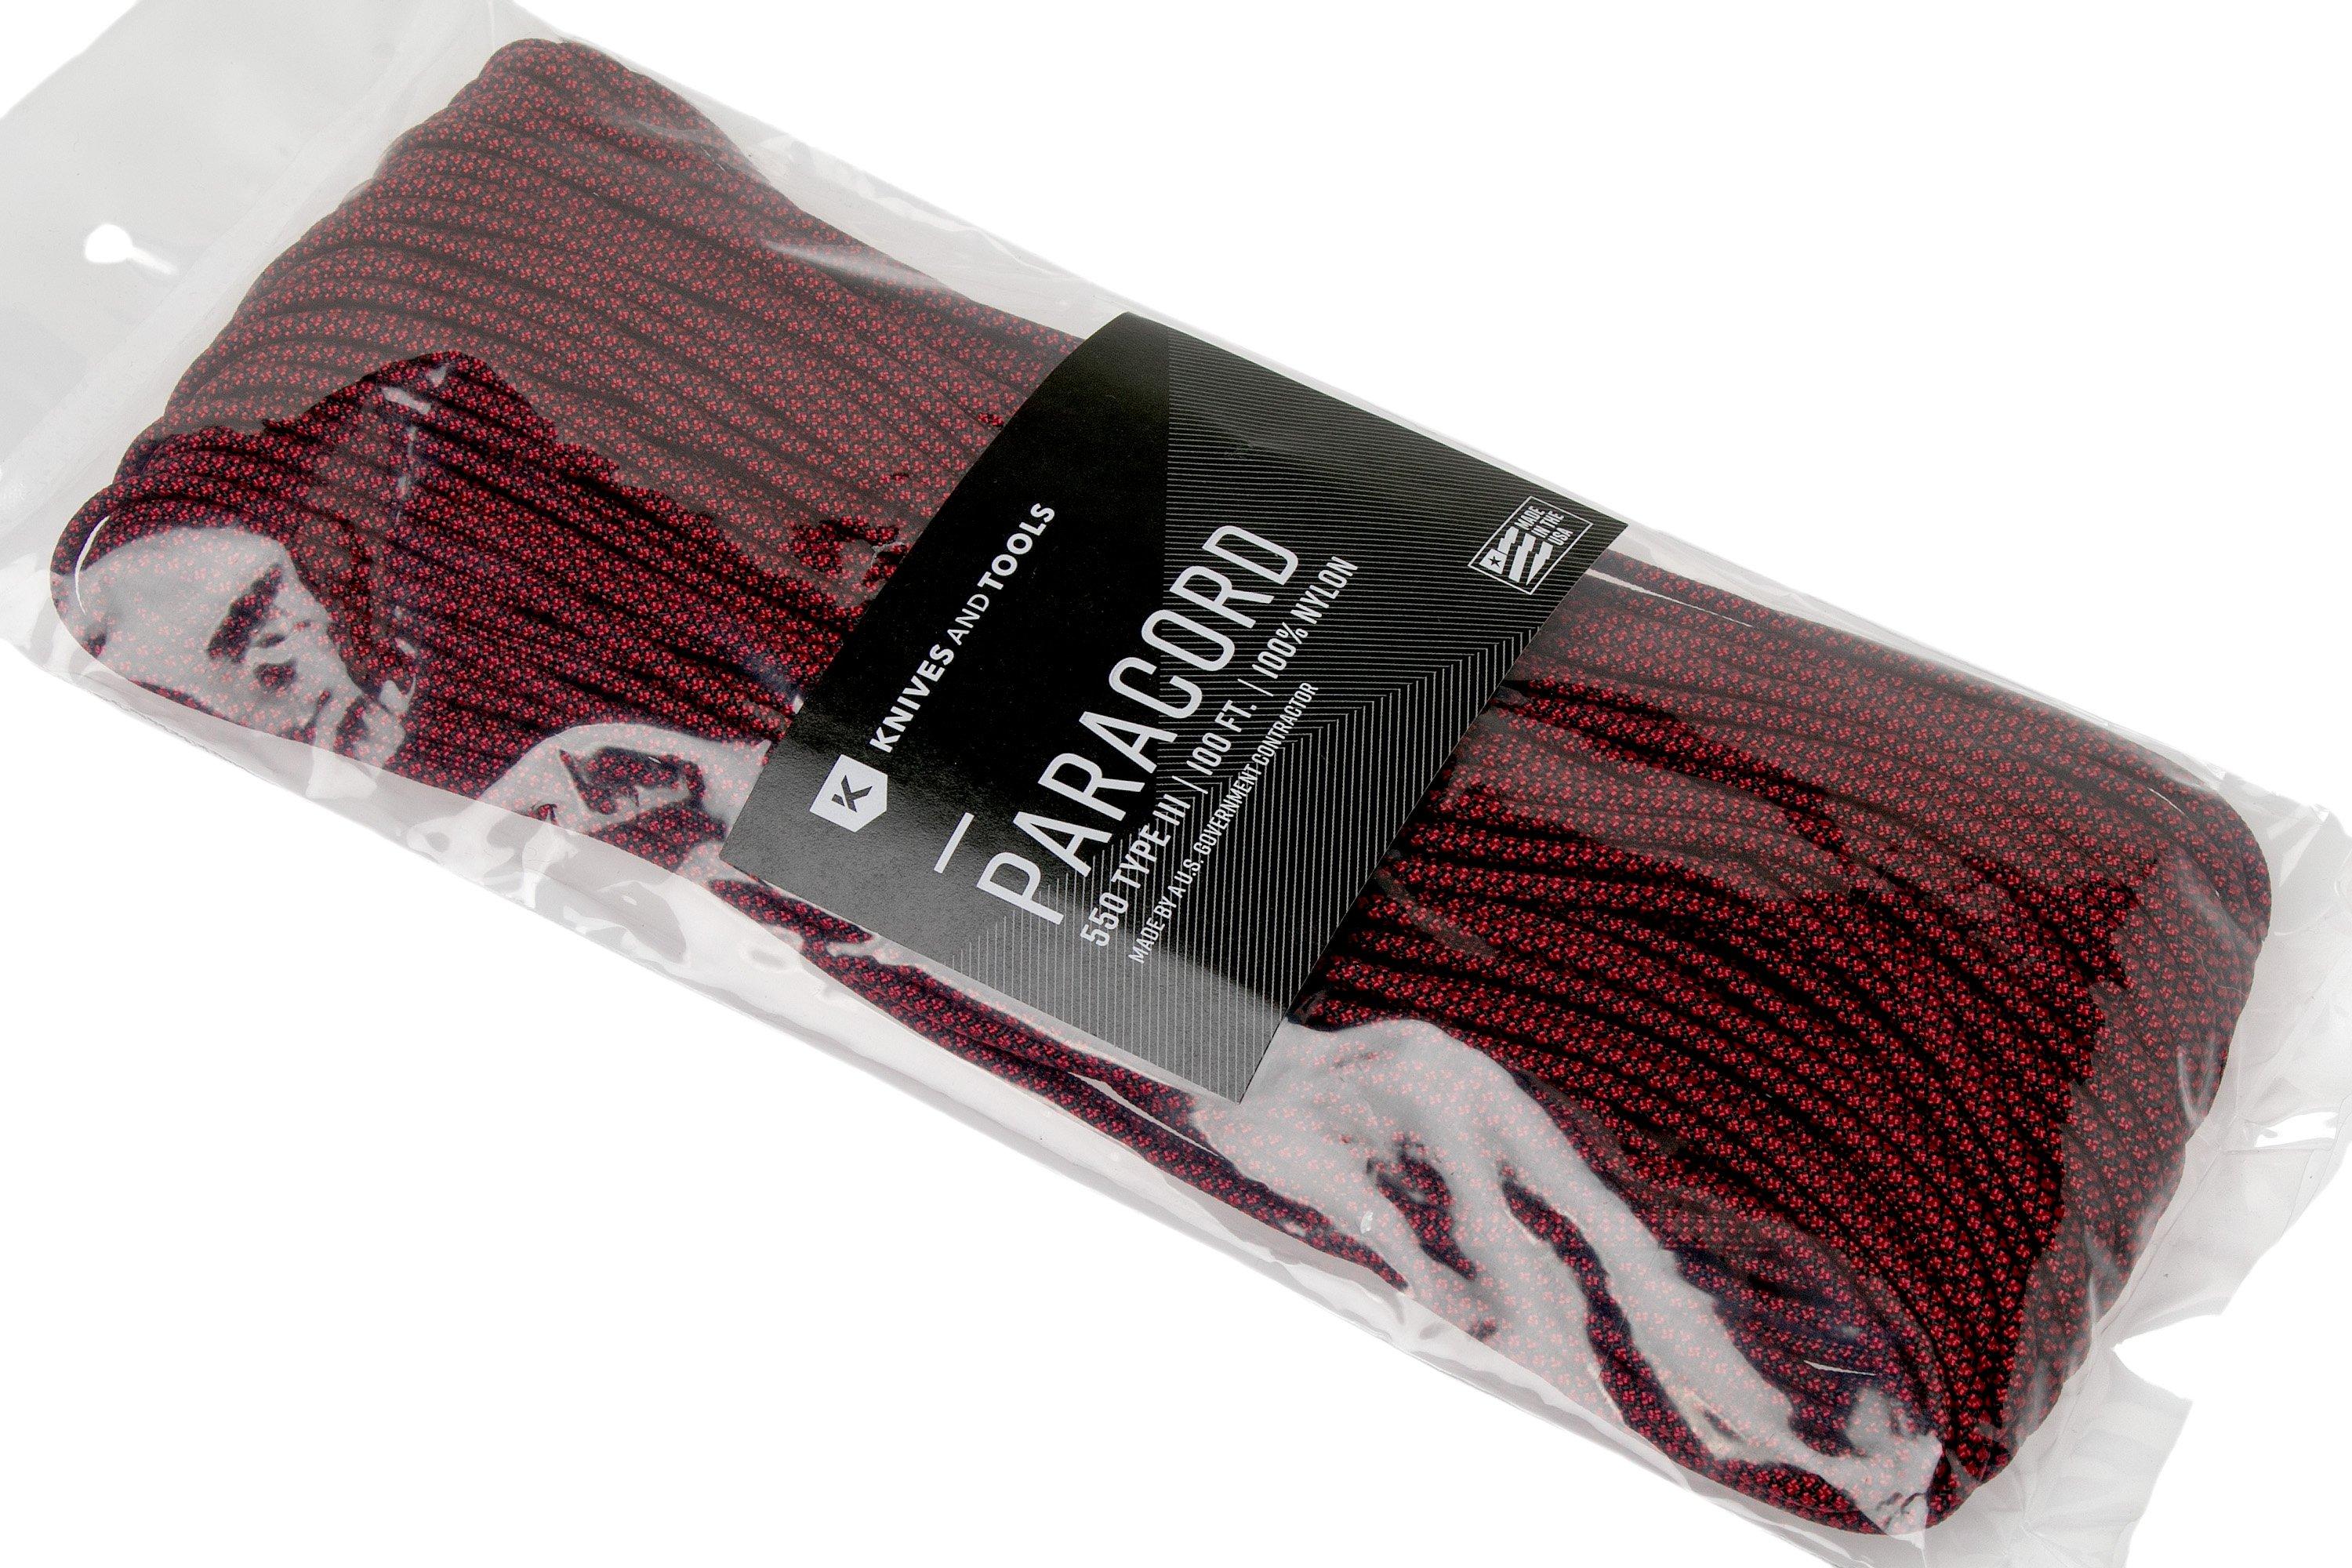 Knivesandtools 550 paracord type III, colour: imperial red diamond